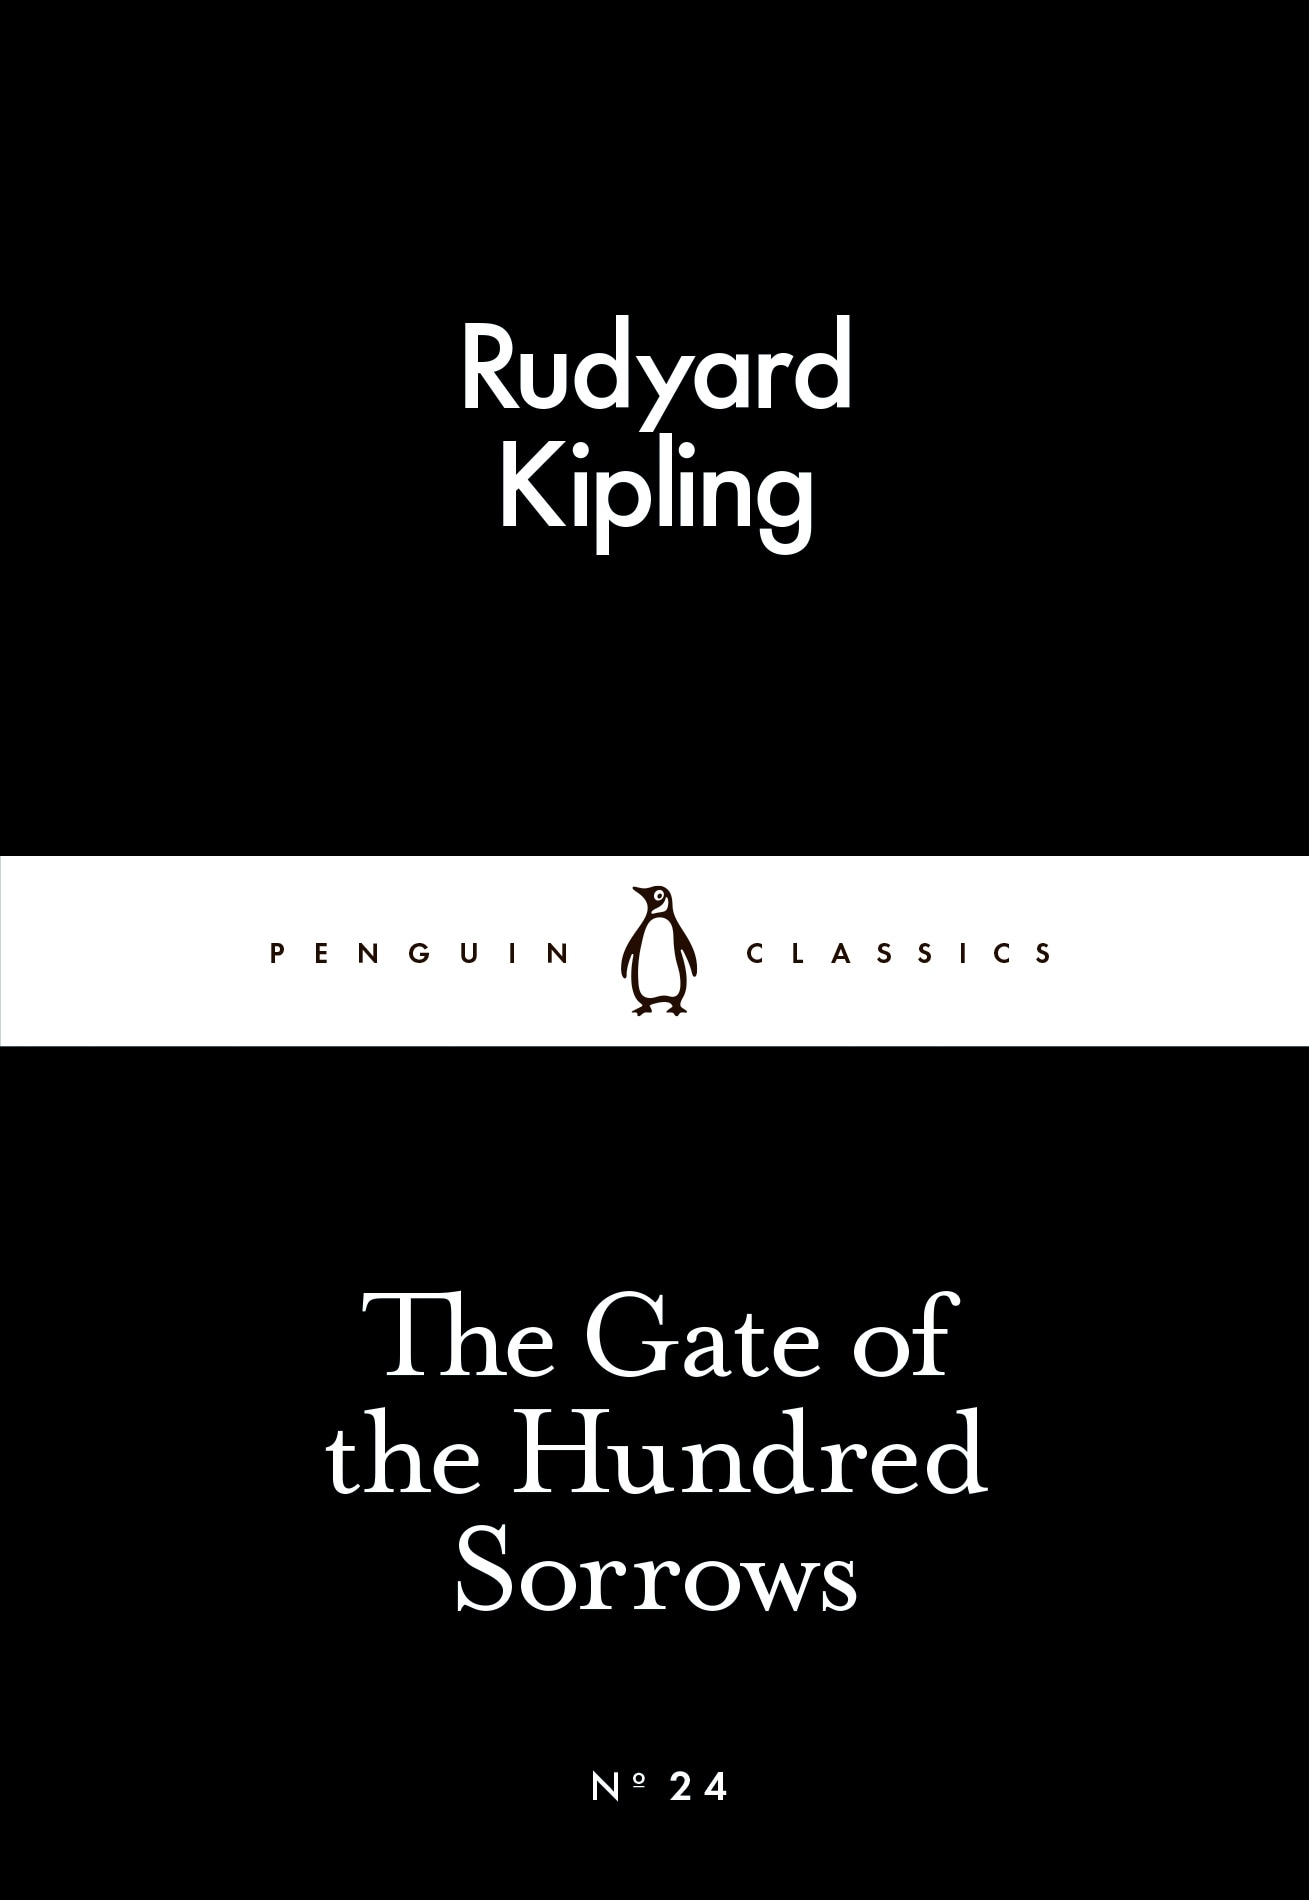 Book “The Gate of the Hundred Sorrows” by Rudyard Kipling — February 26, 2015